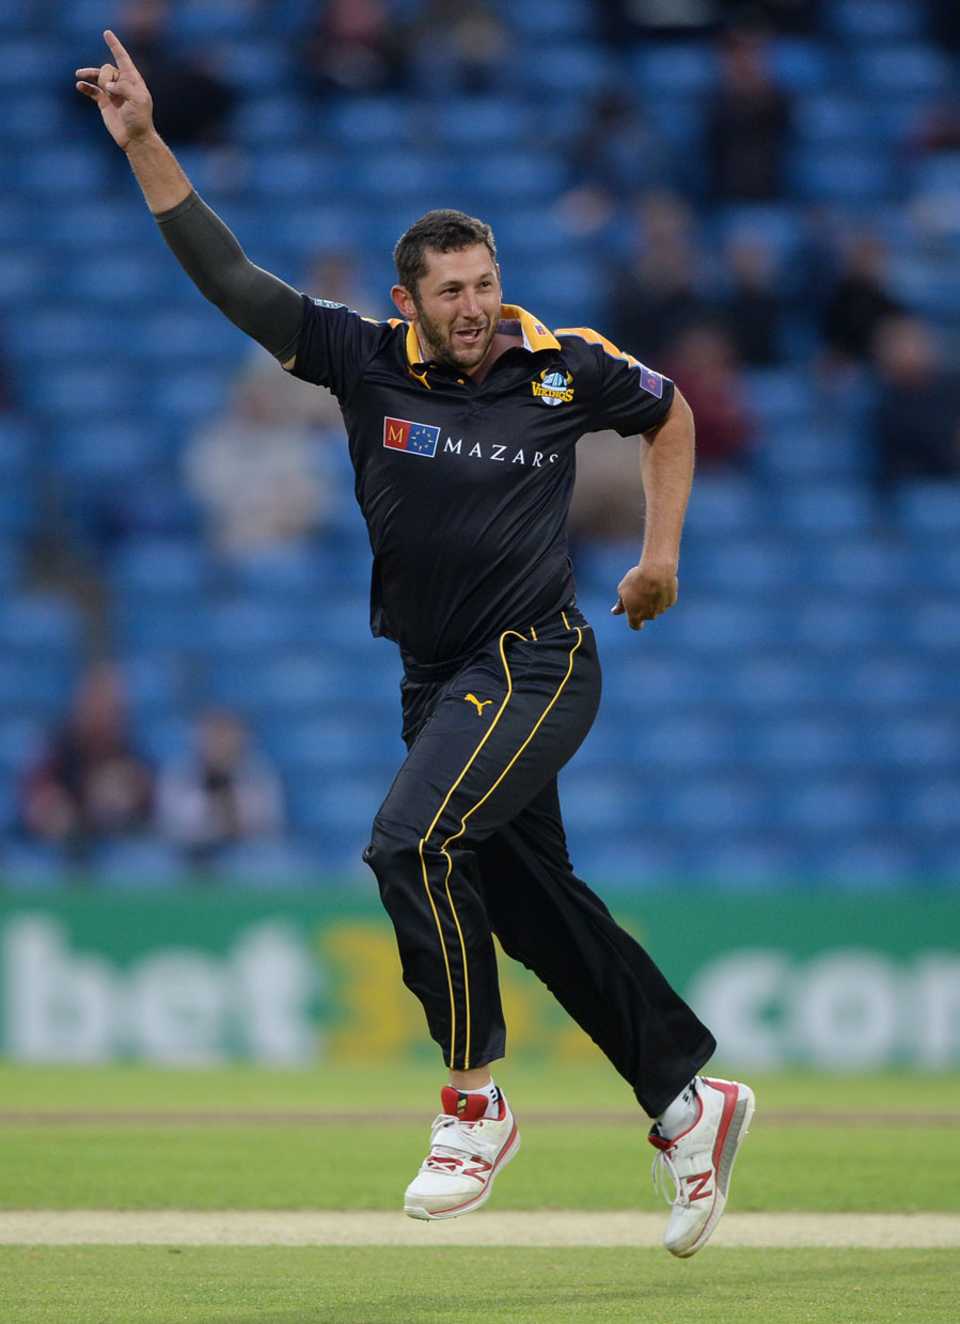 Tim Bresnan struck in his first over